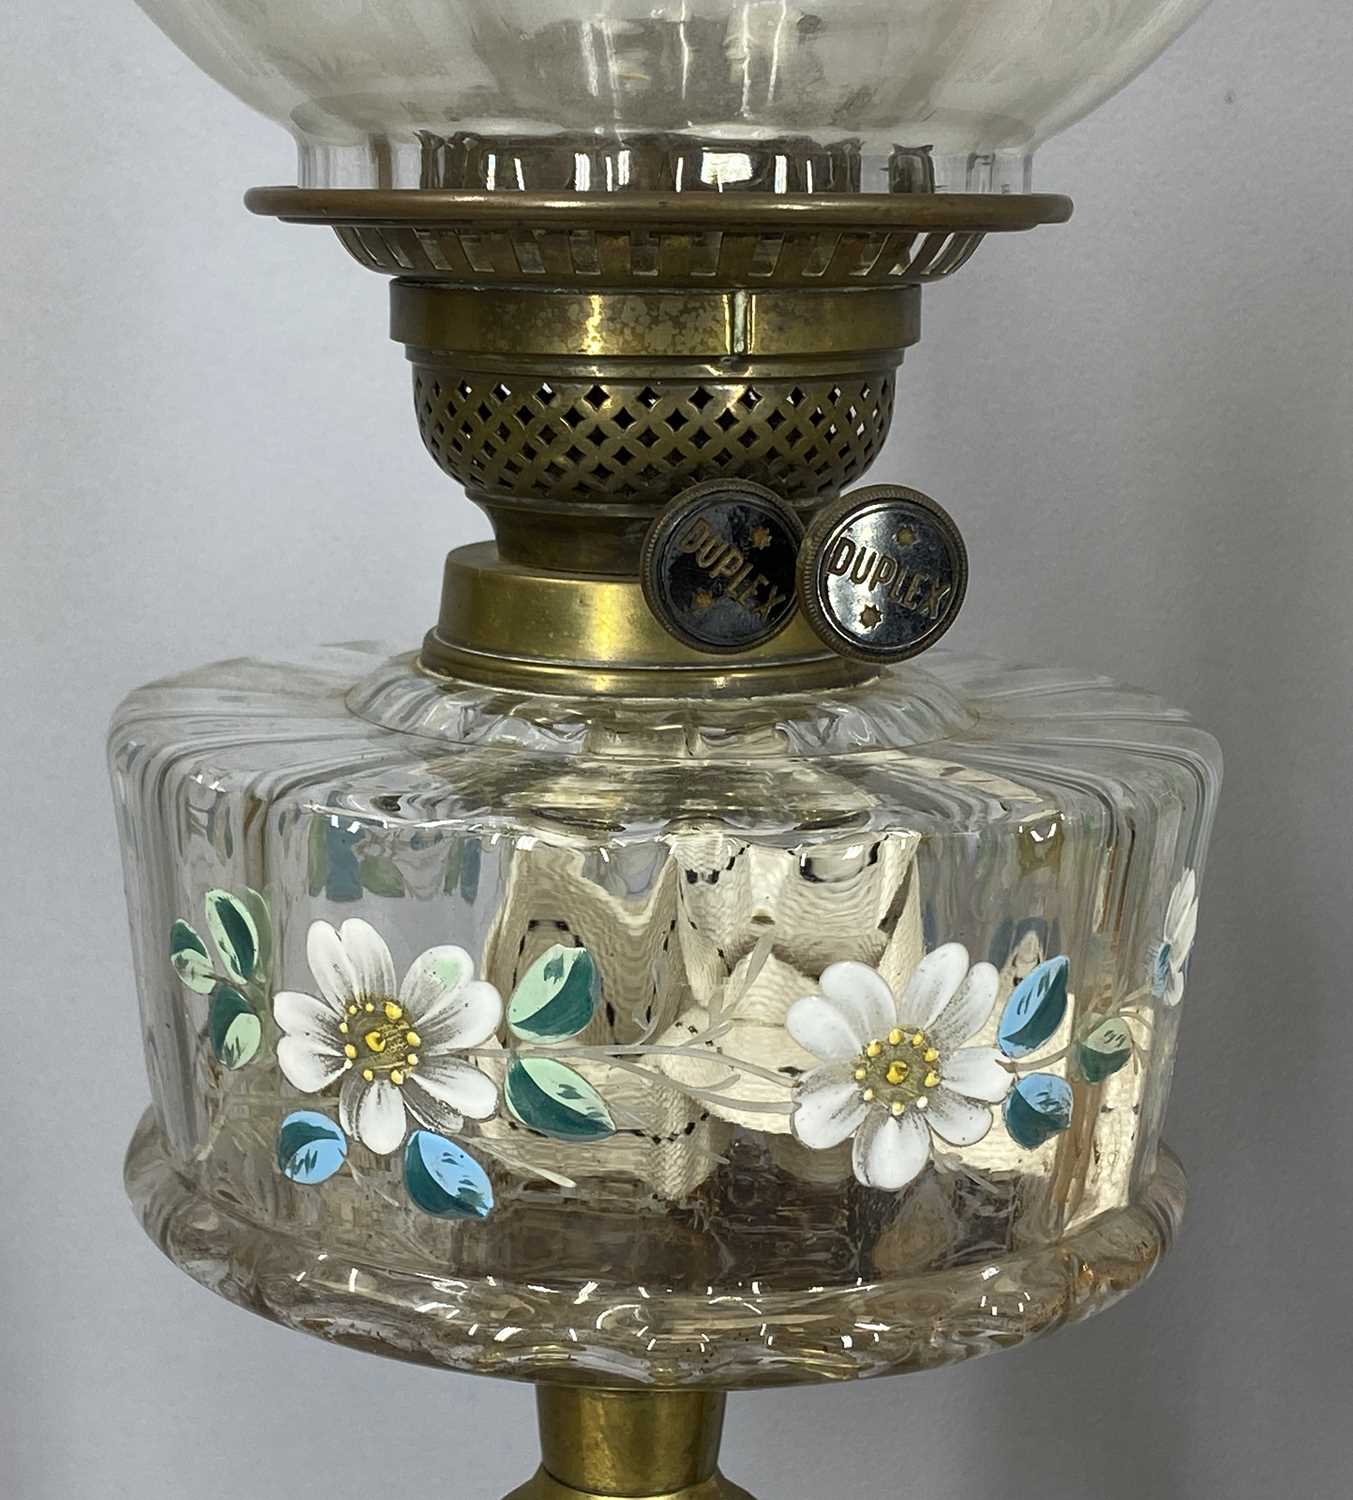 LATE 19TH CENTURY OIL LAMP with circular brass base and column, floral painted clear glass - Image 2 of 3